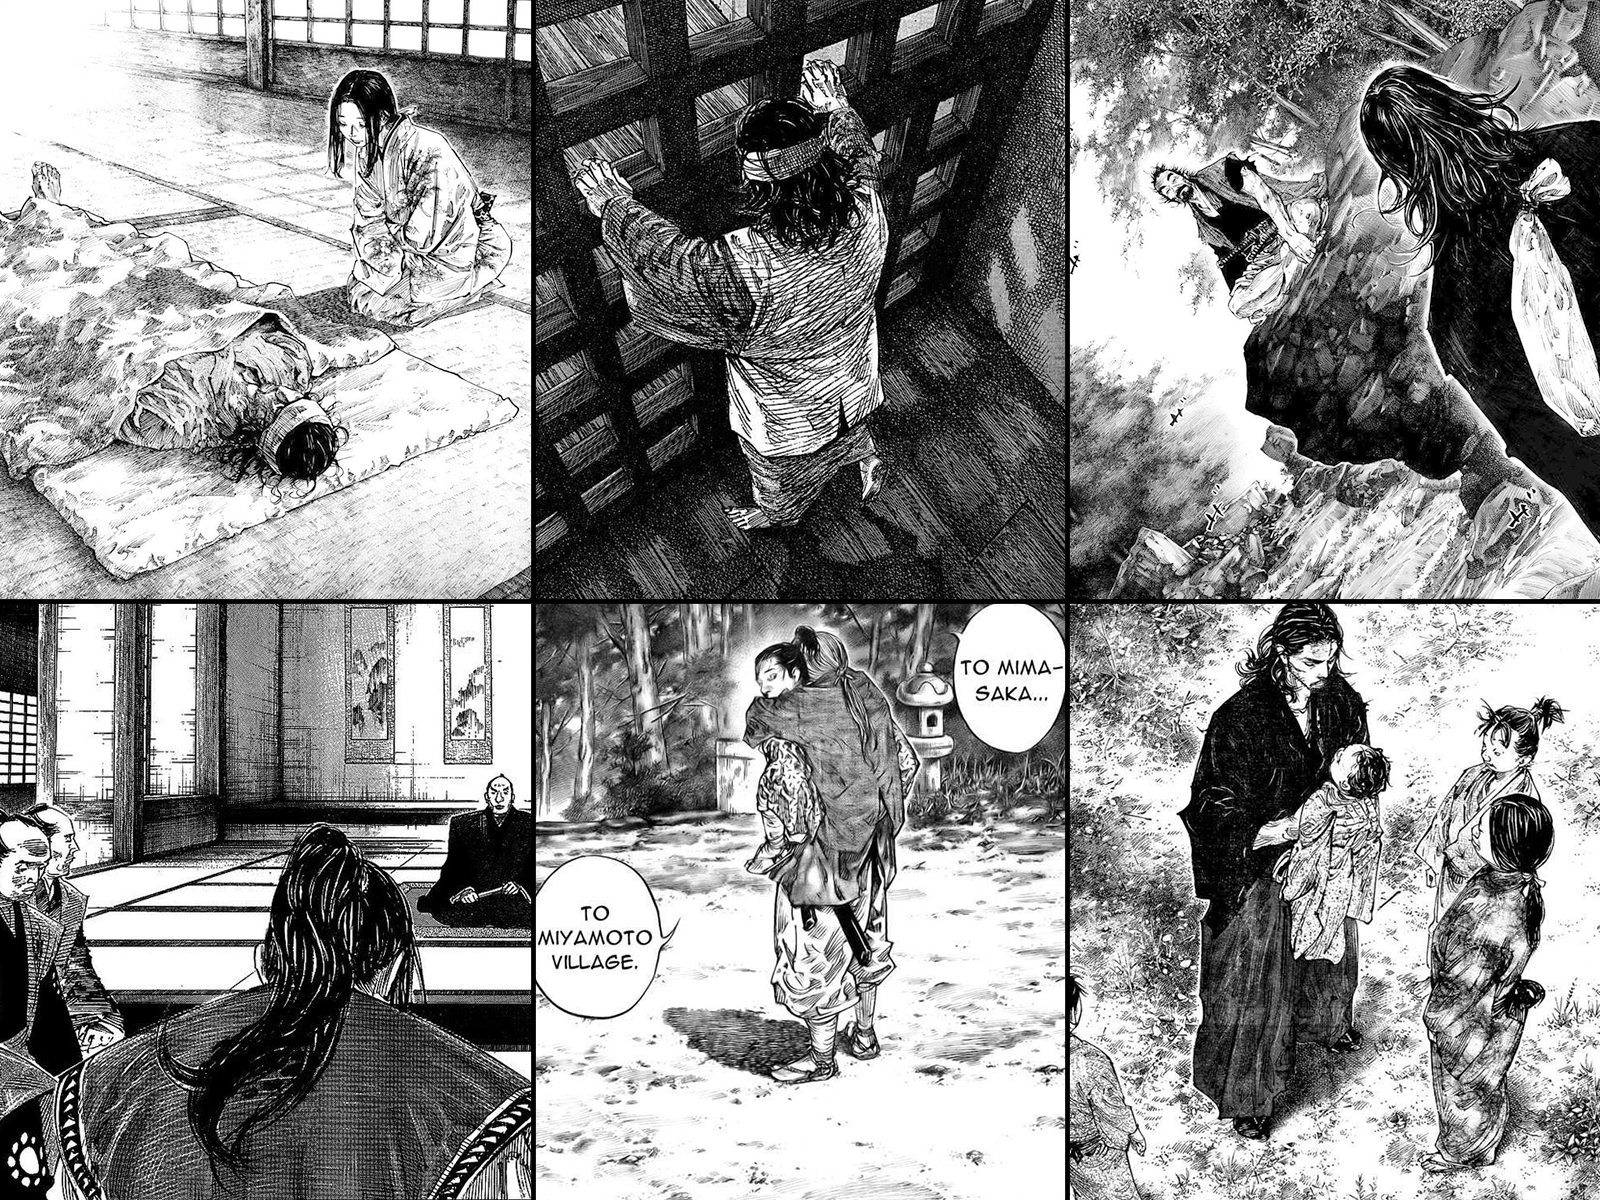 A Just Cause  Vinland Saga S2 Ep 16 Review  In Asian Spaces